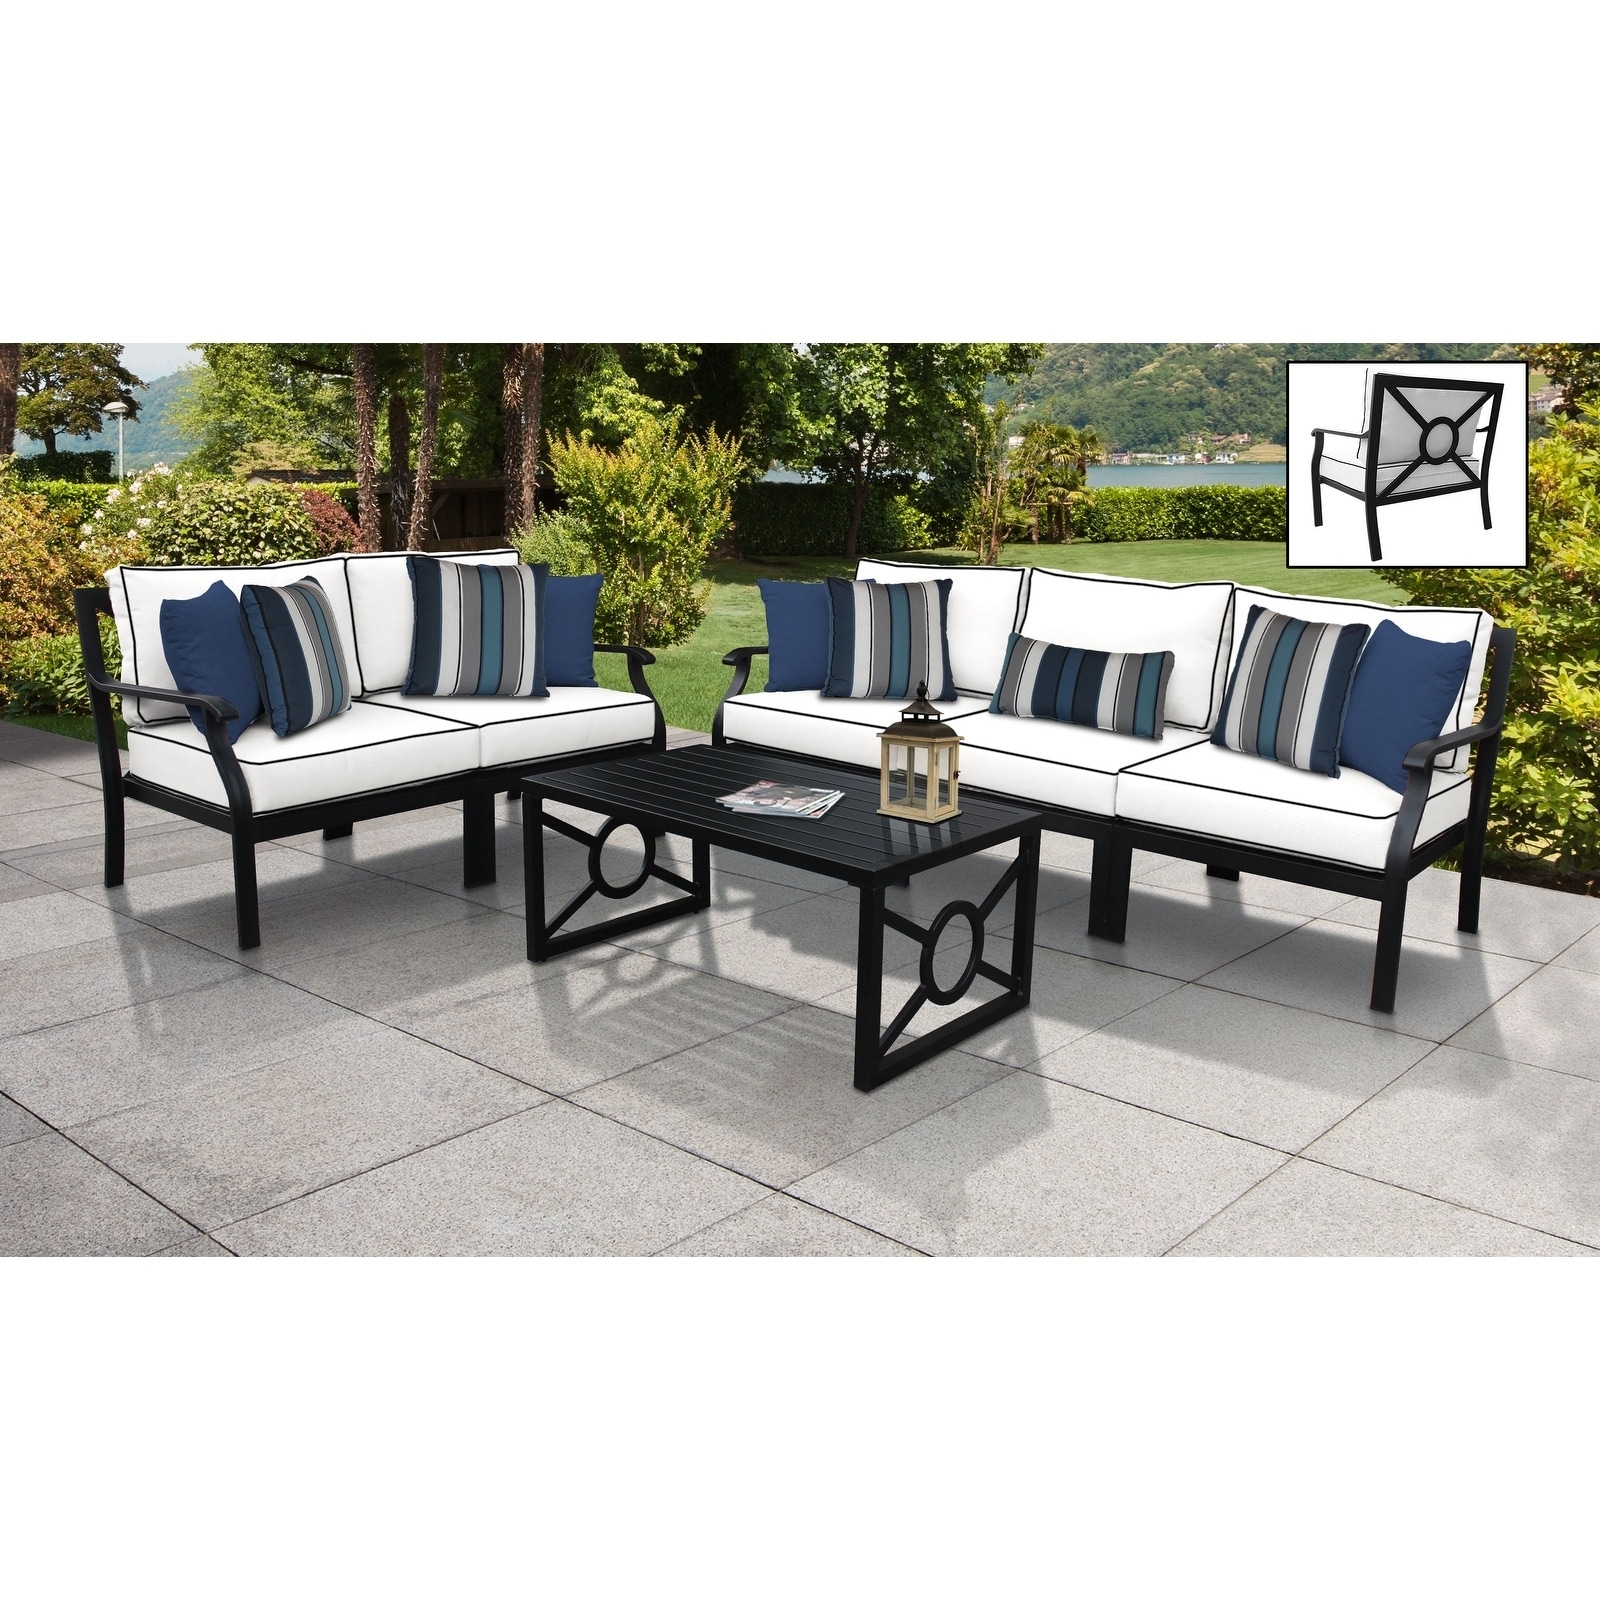 Kathy Ireland Homes and Gardens Madison Ave. 6 Piece Outdoor Aluminum Patio Furniture Set 06m